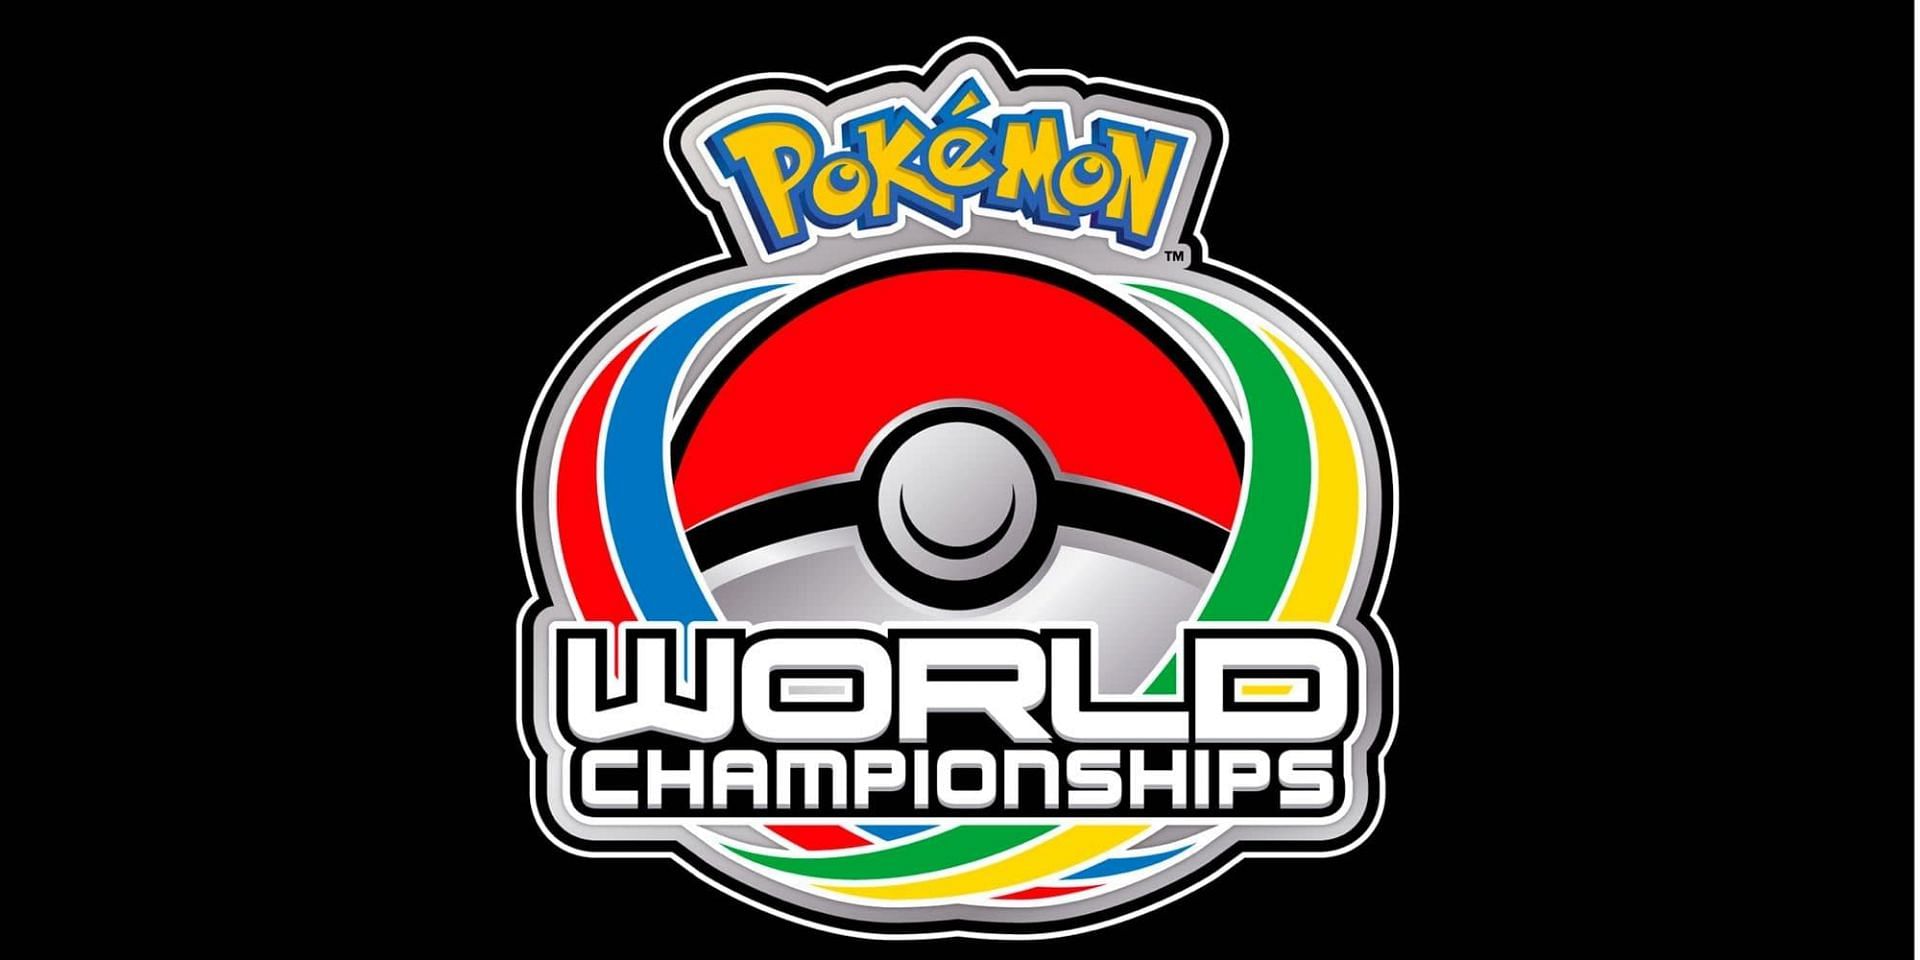 This international tournament has existed since 2004 (Image via The Pokemon Company)